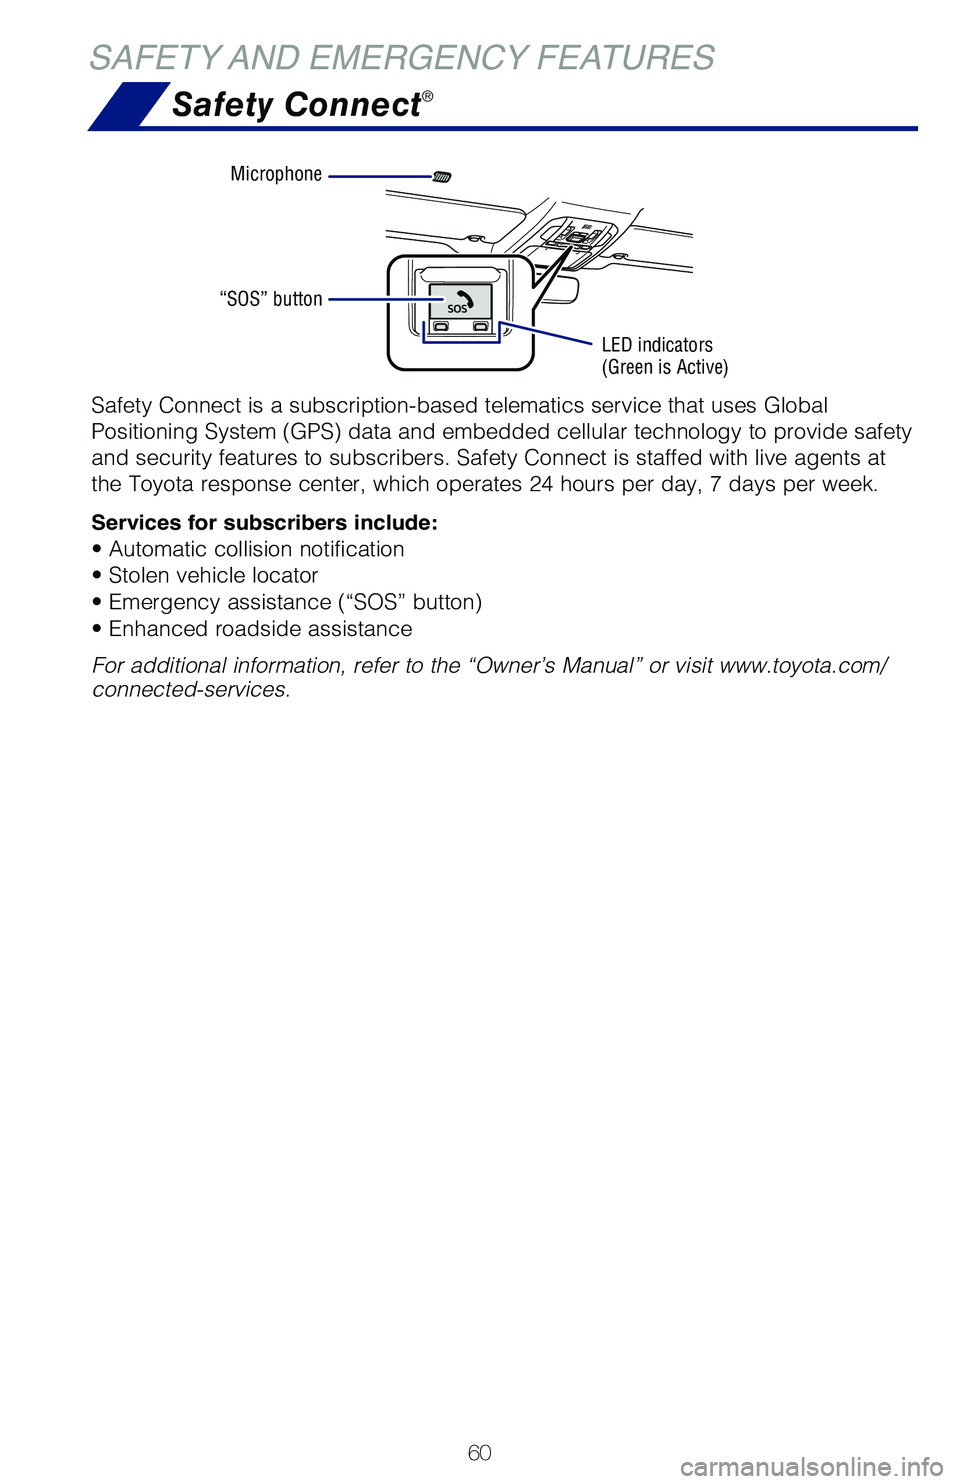 TOYOTA HIGHLANDER HYBRID 2021  Owners Manual (in English) 60
SAFETY AND EMERGENCY FEATURESSafety Connect
®
Safety Connect is a subscription-based telematics service that uses Glob\�al 
Positioning System (GPS) data and embedded cellular technology to prov